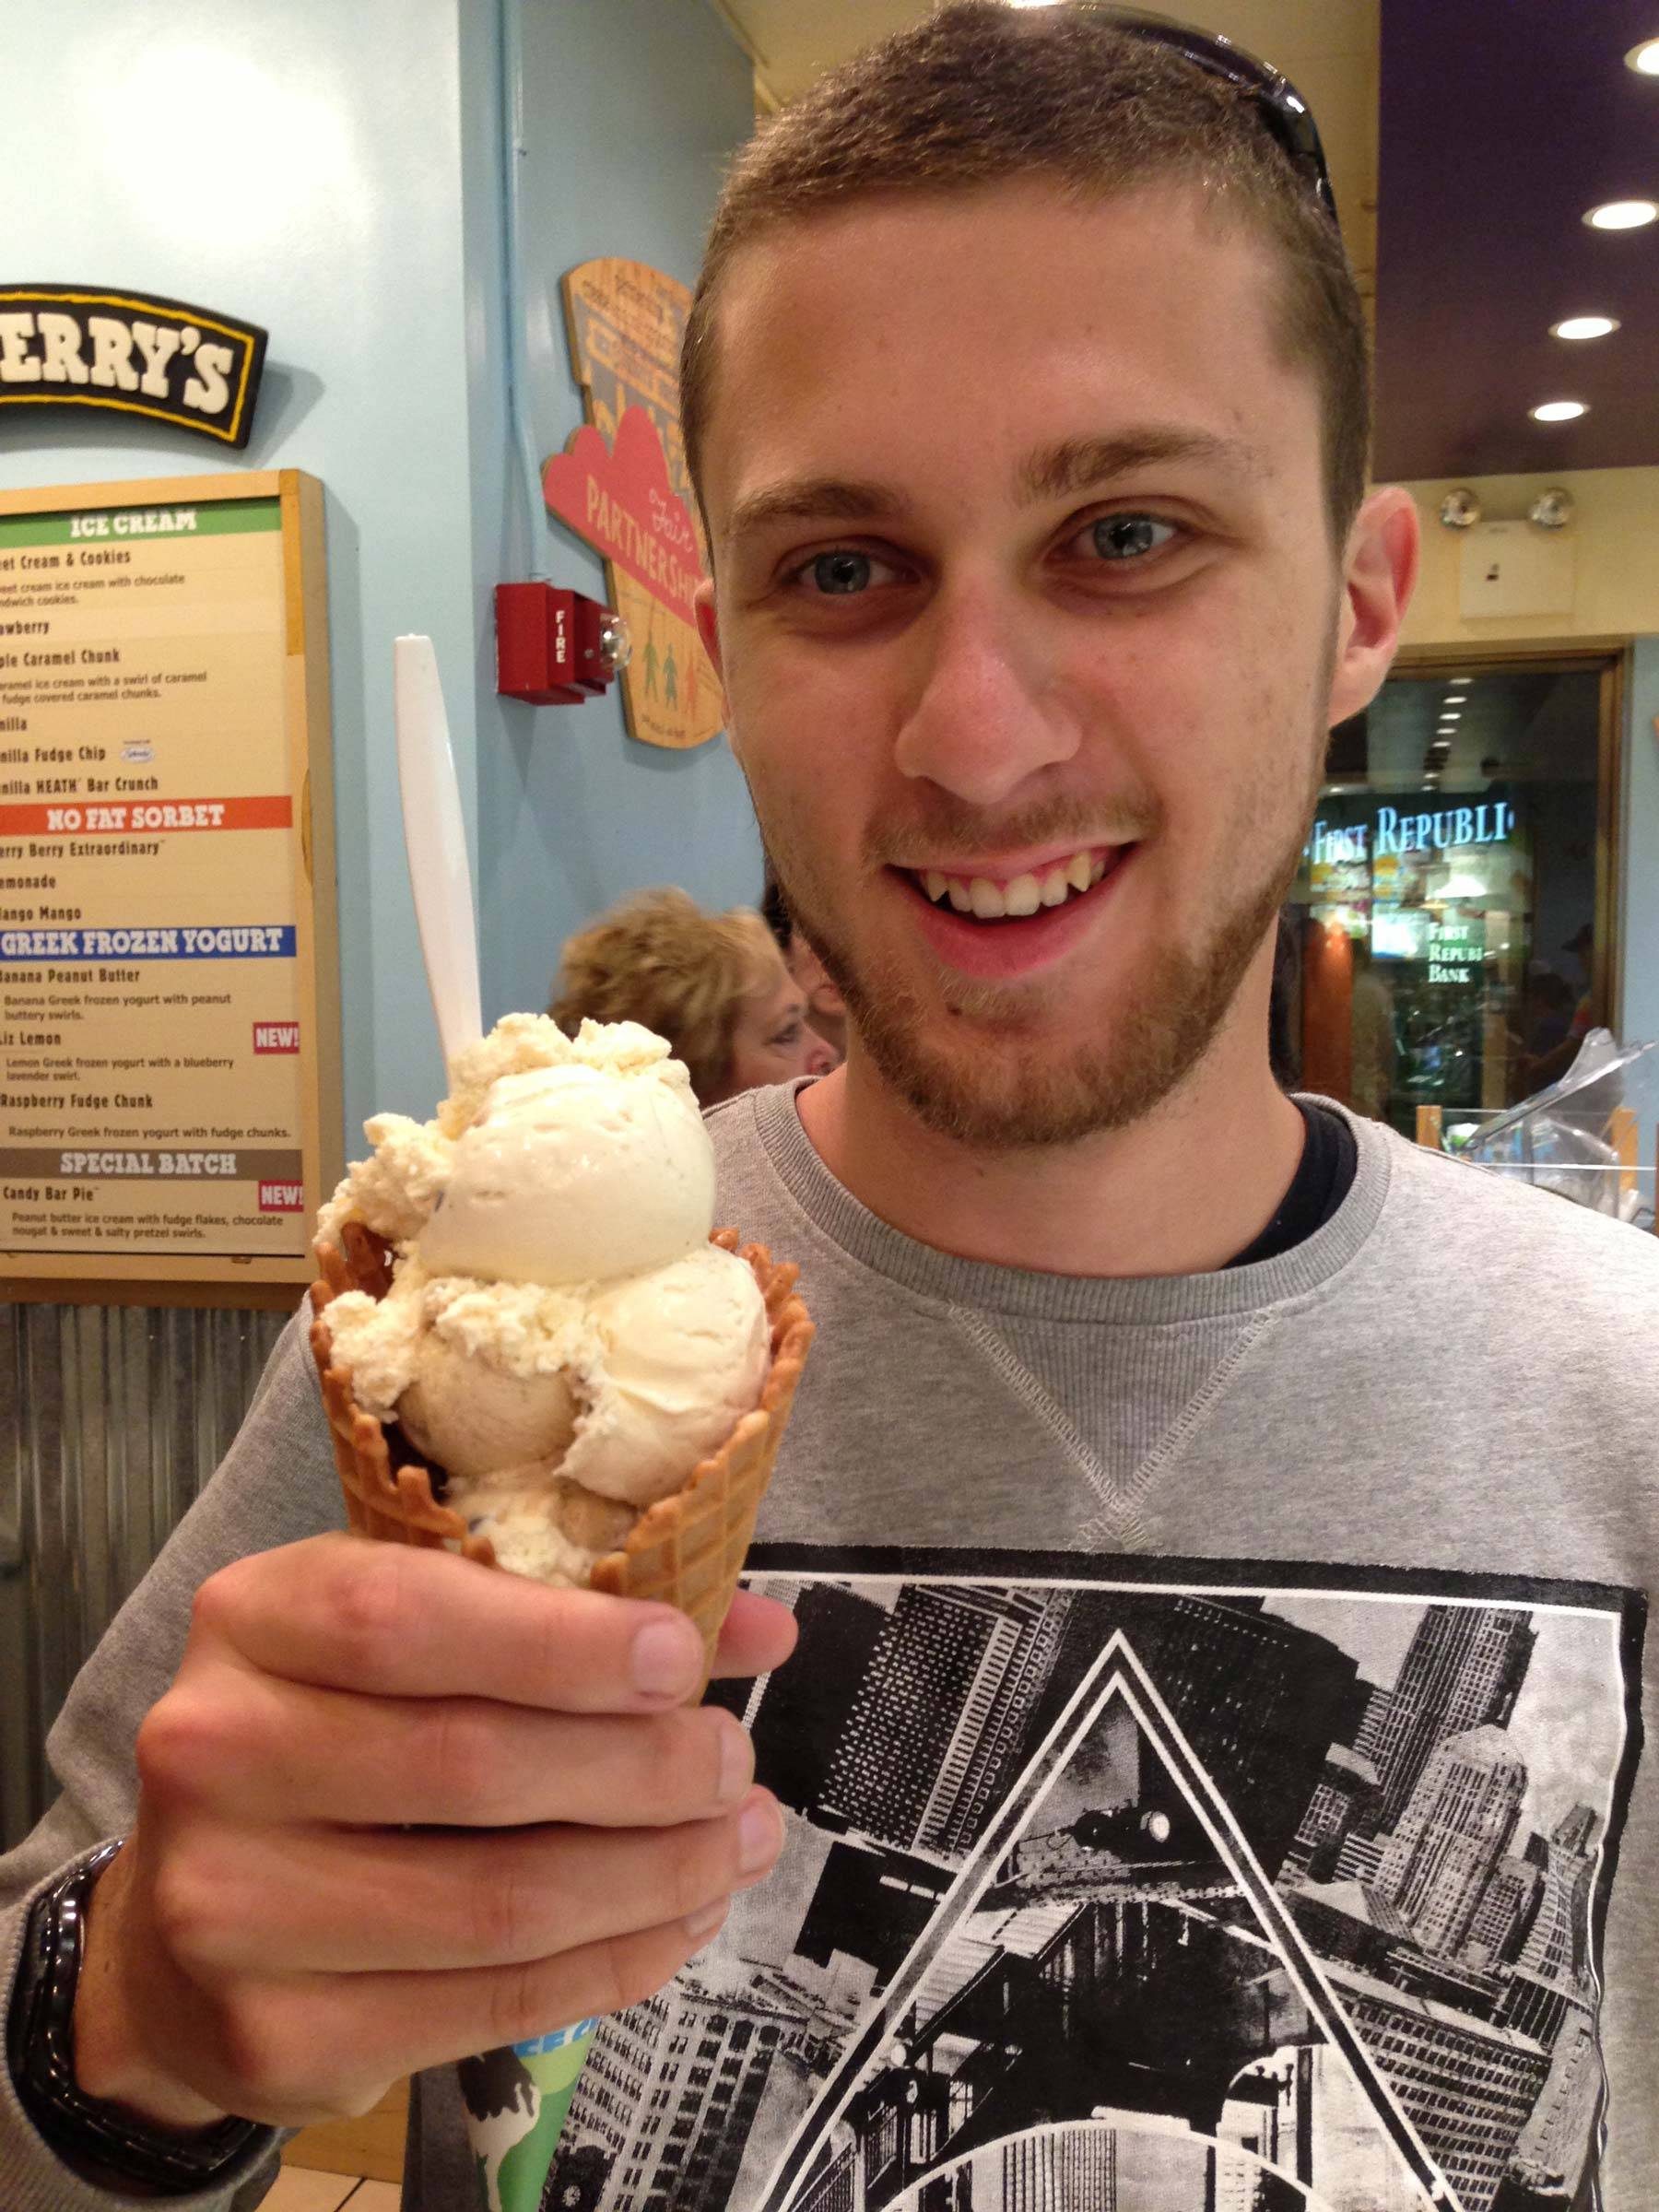 Irwin with a Ben & Jerry’s cone